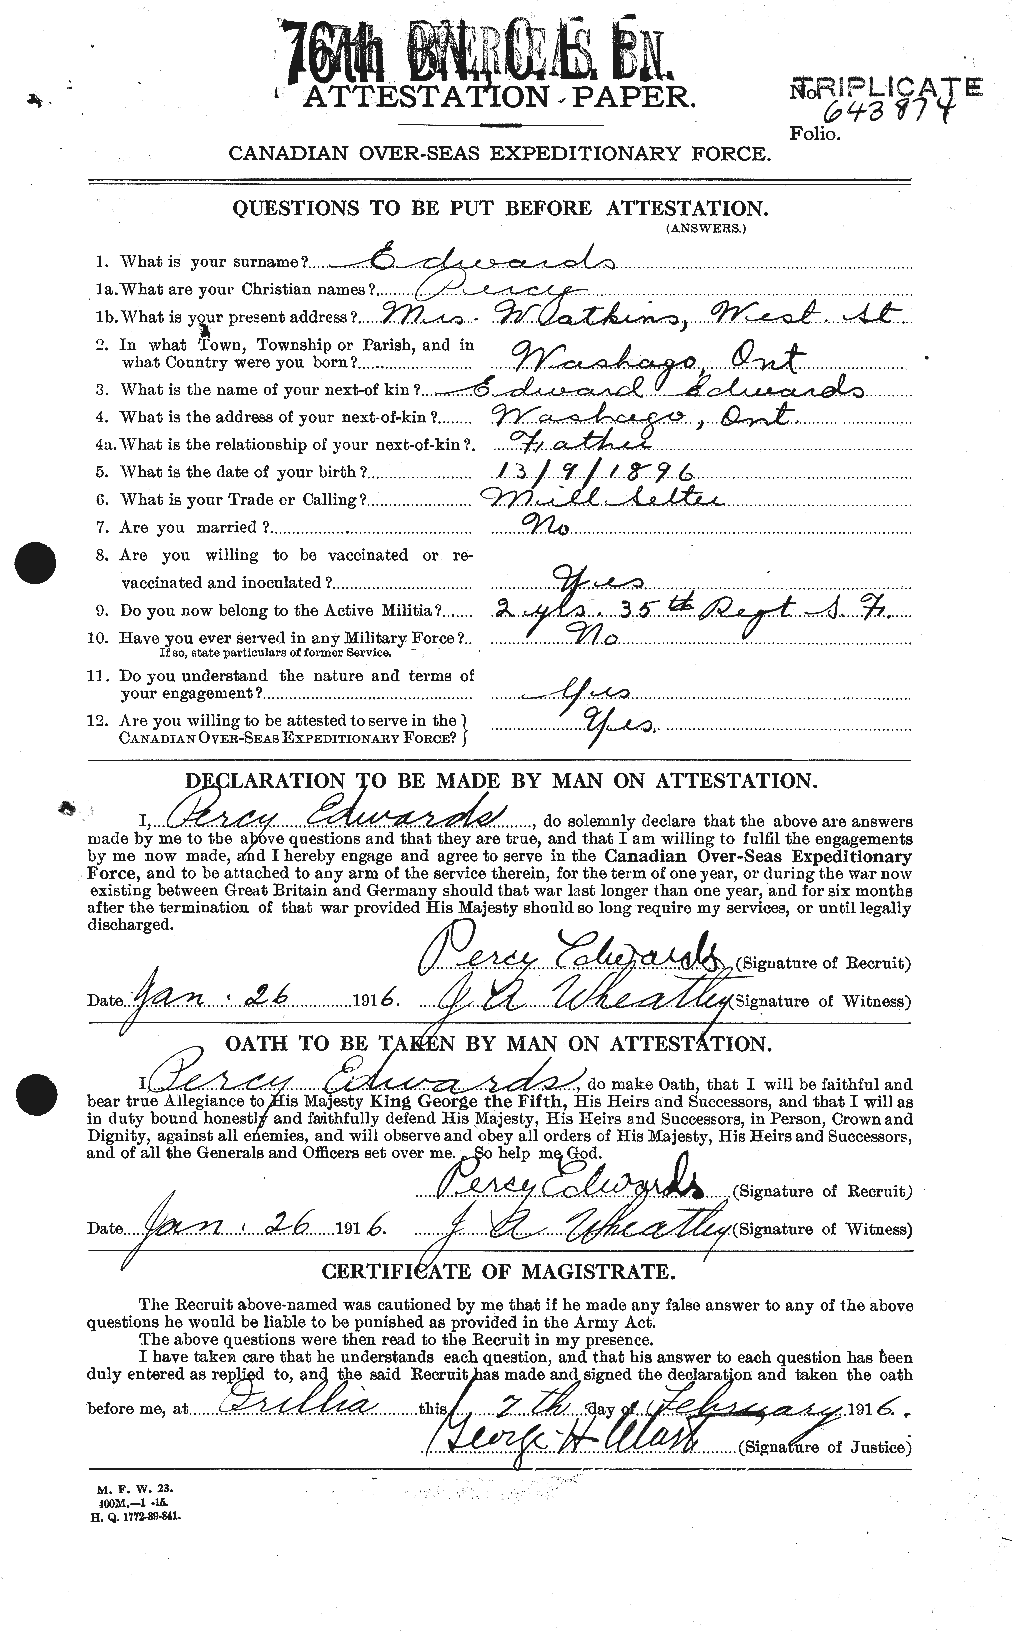 Personnel Records of the First World War - CEF 310233a